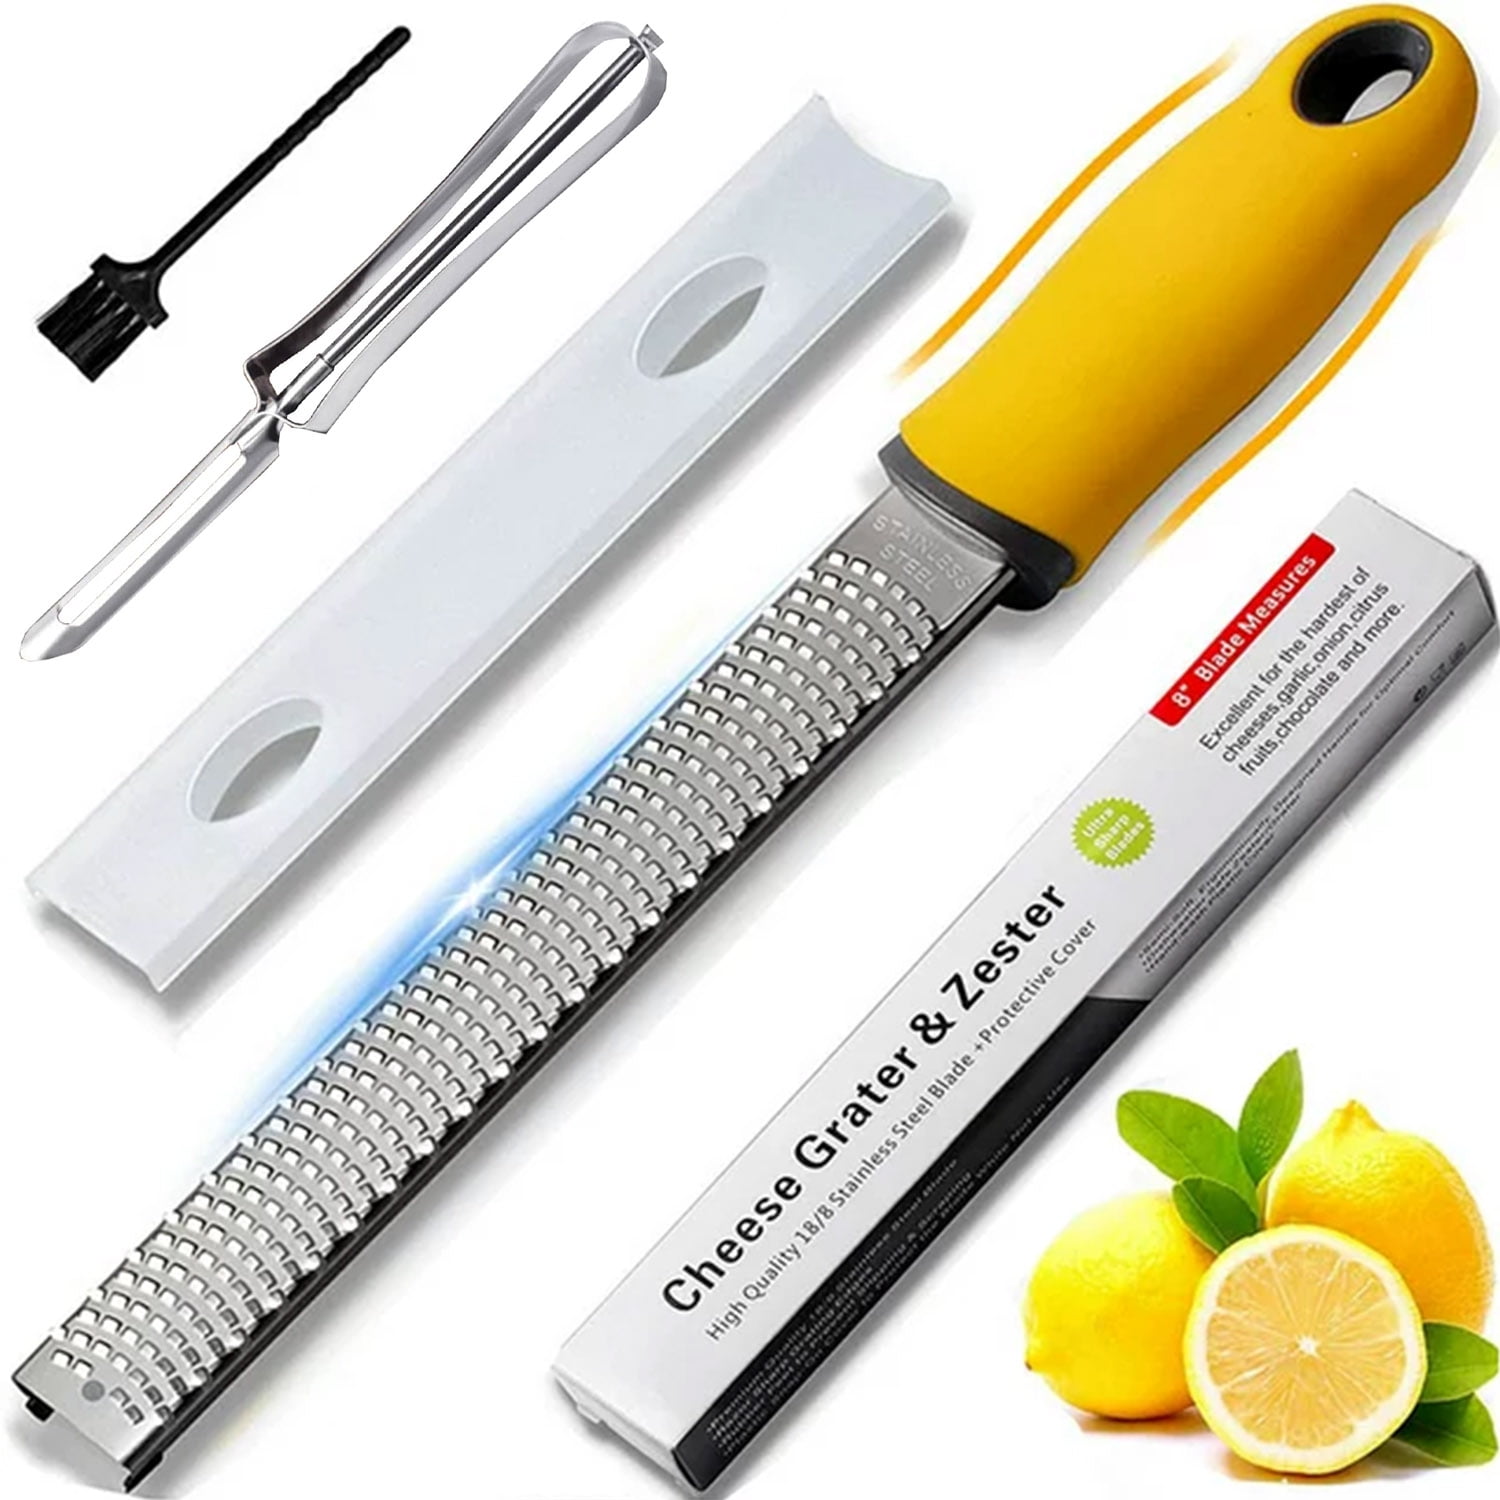 Humzena Lemon Zester Grater with Handle - Sharp Lemon Zester Tool -  Stainless Steel Lemon Grater Zester - Cheese Ginger Spices Grater Zester -  Easy to